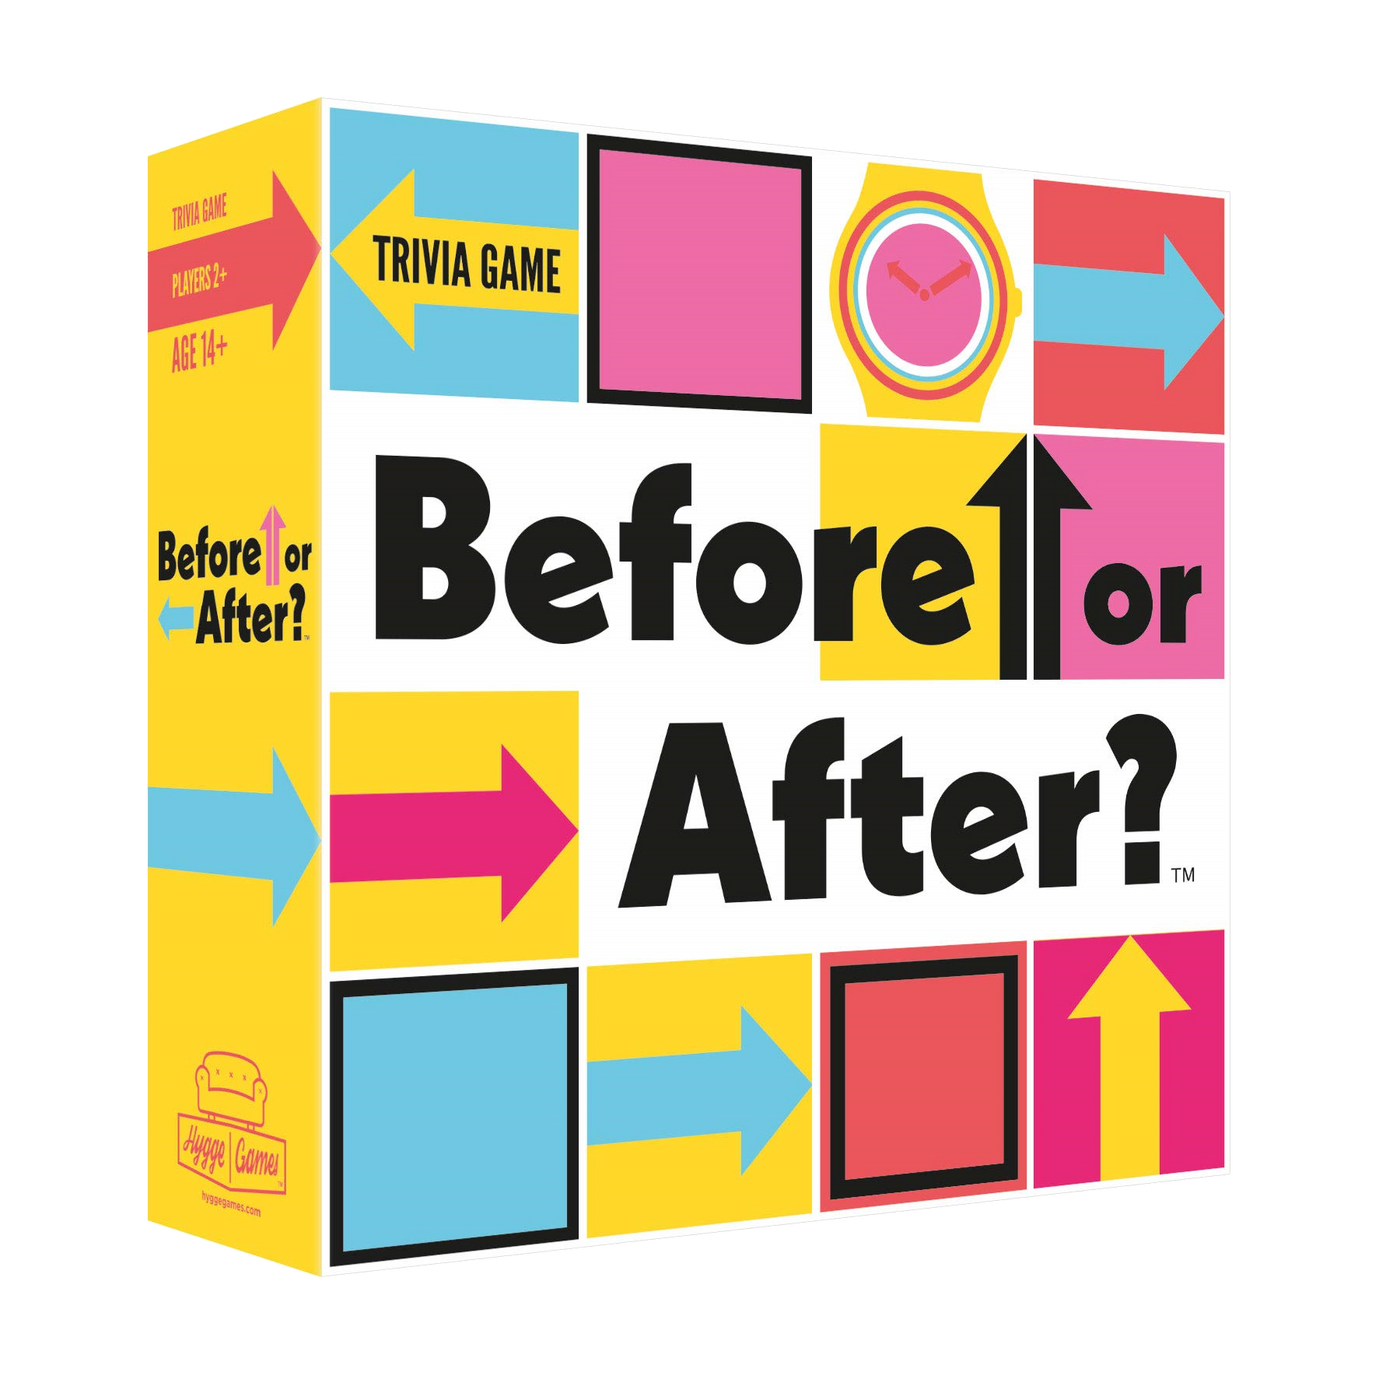 Before or After?